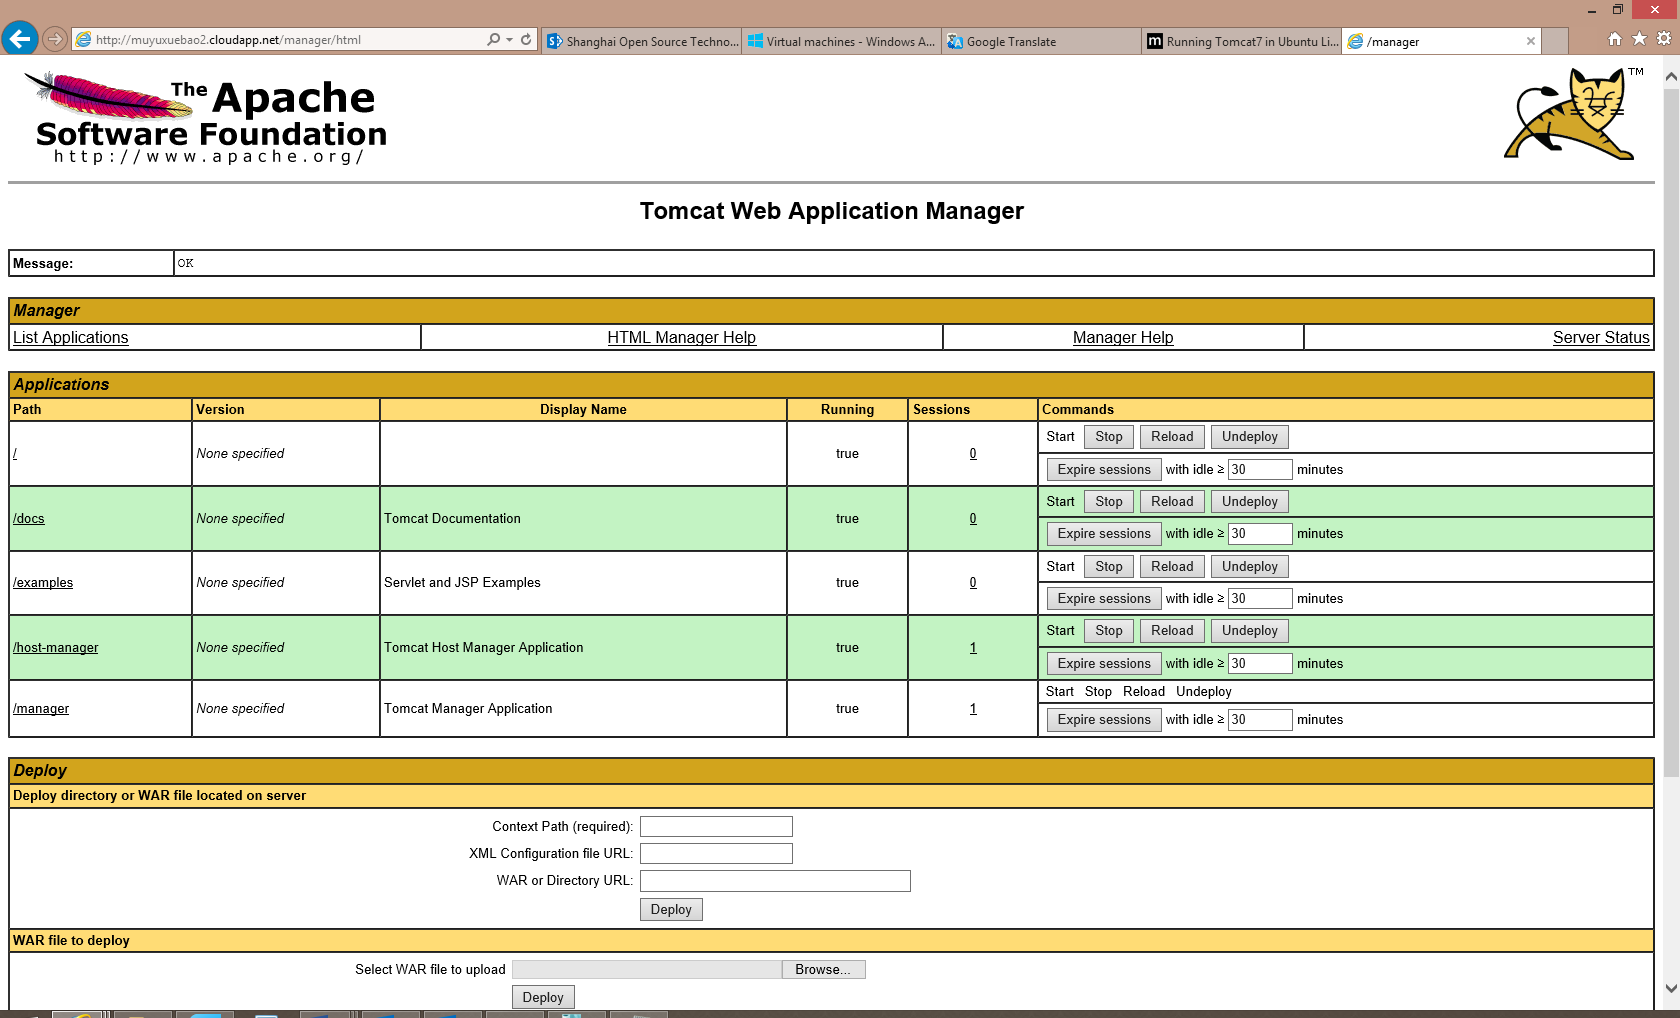 Screenshot of the Tomcat Web Application Manager